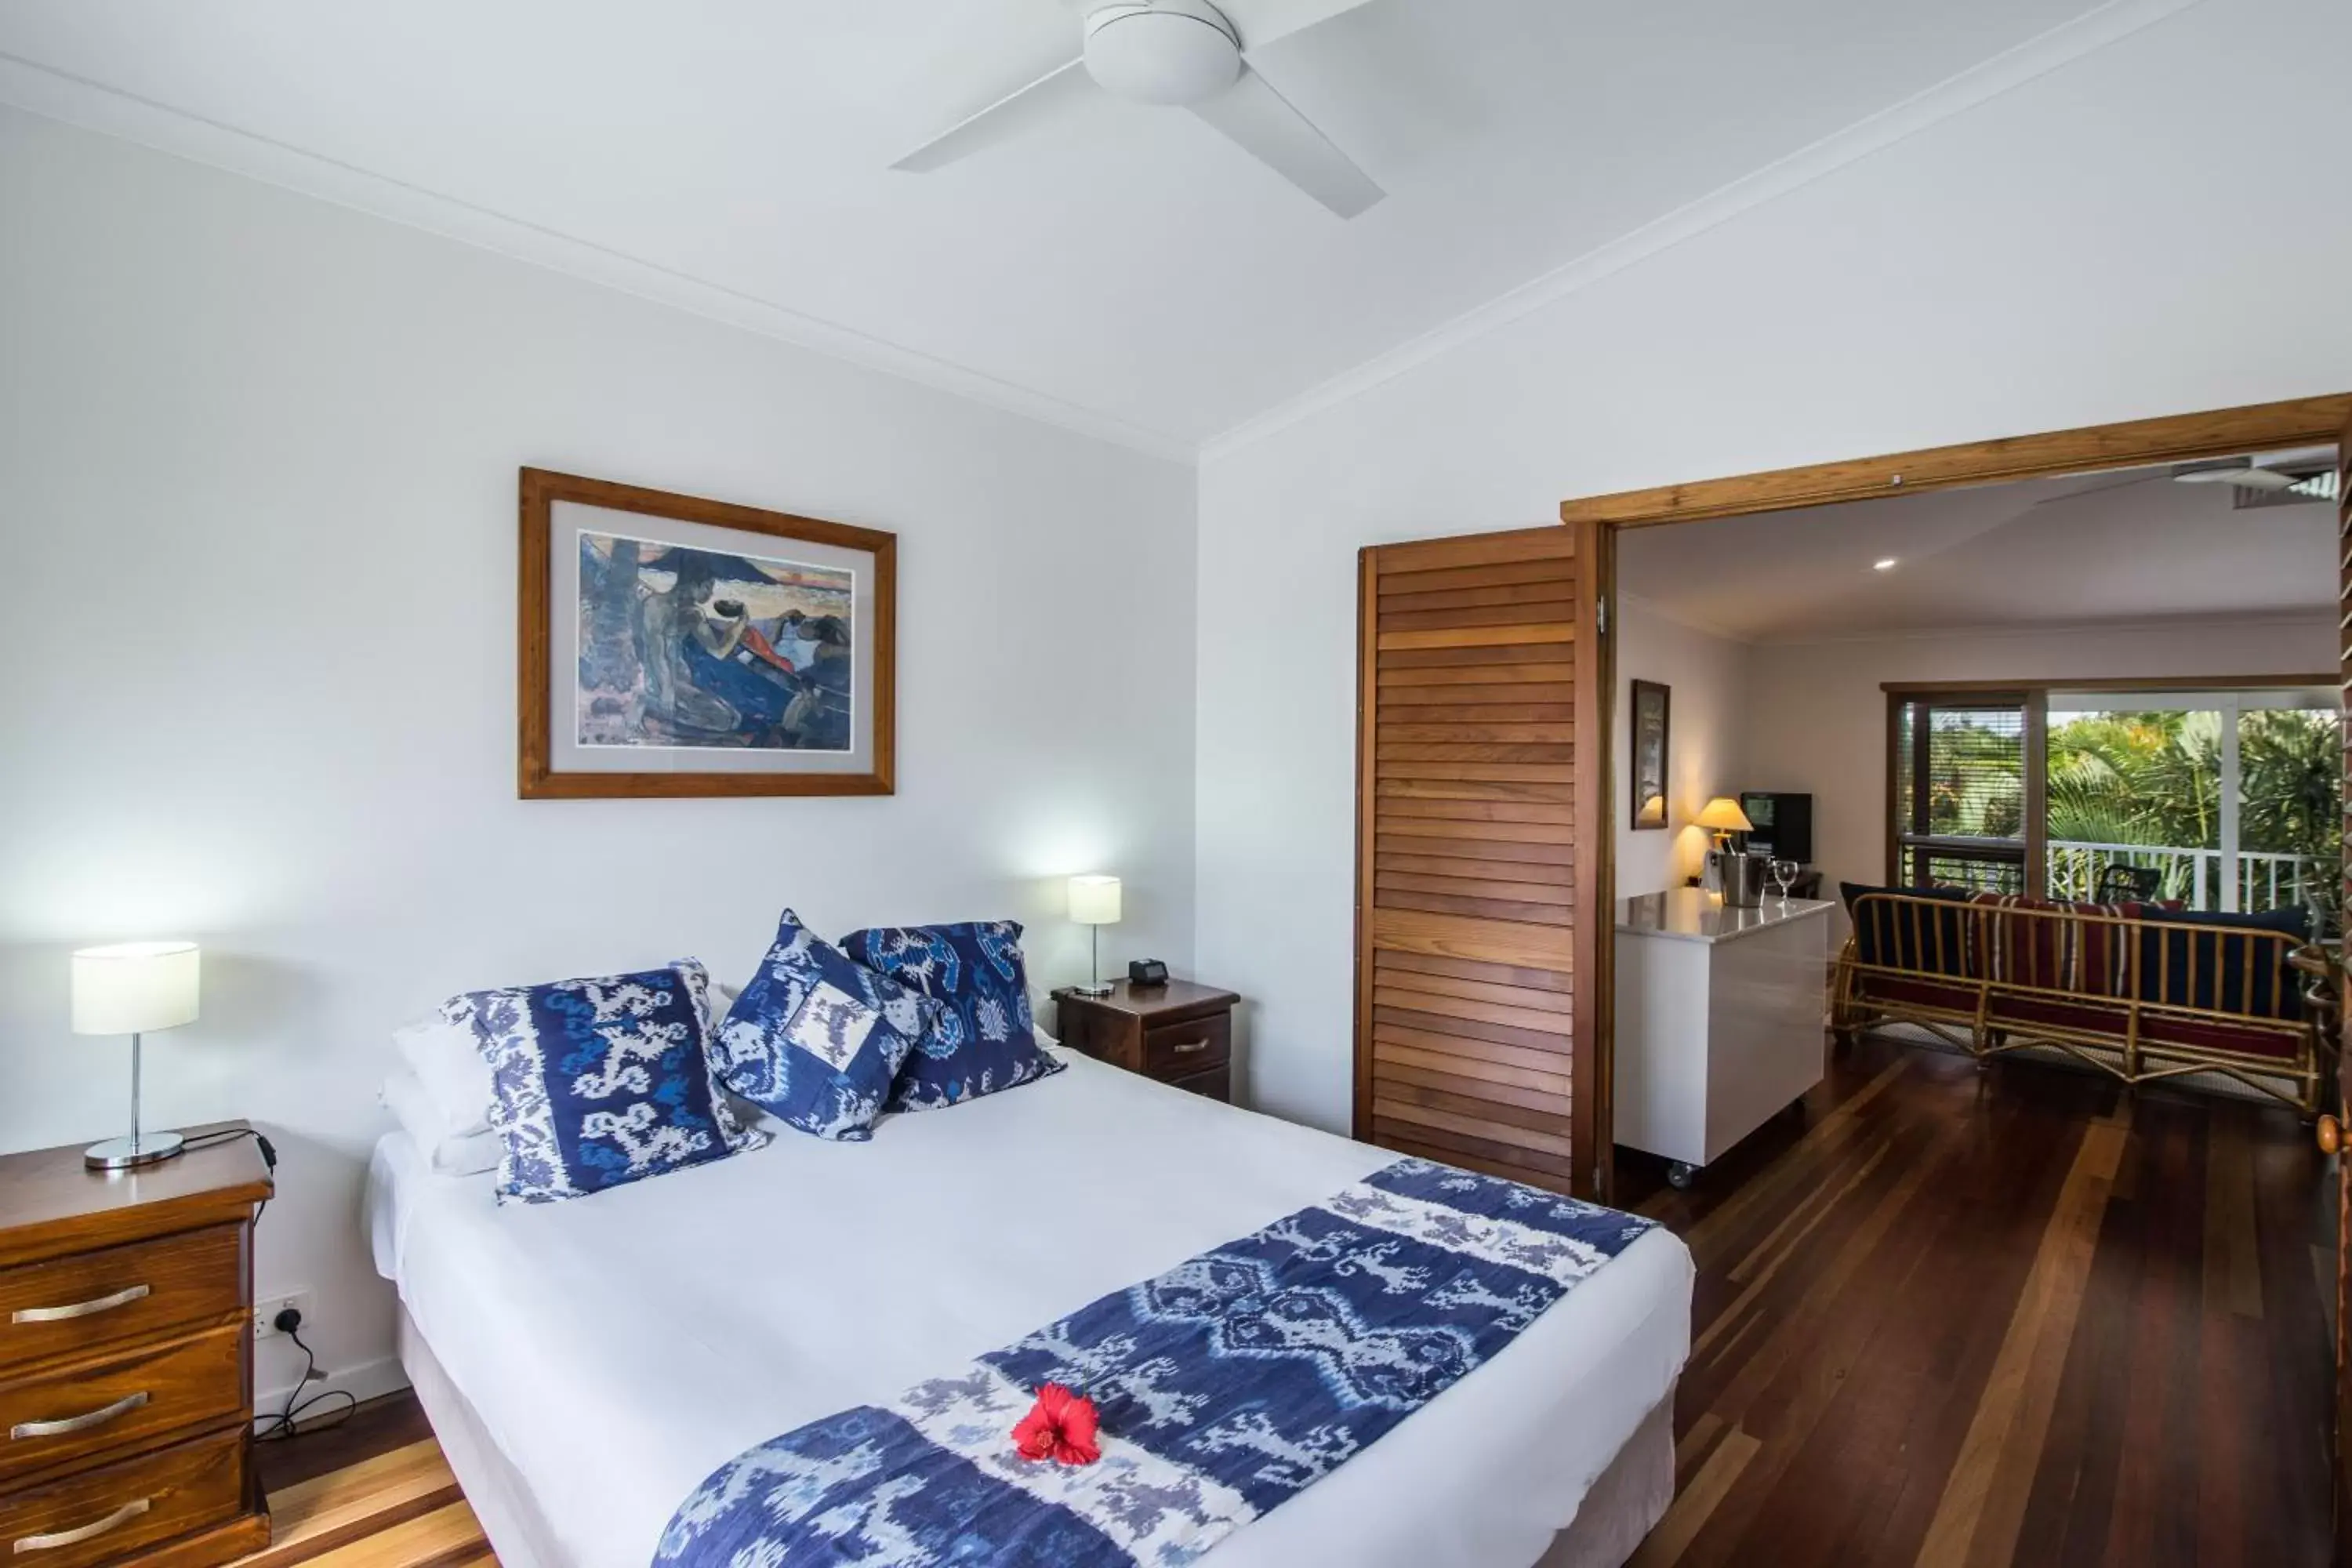 Bed, Room Photo in South Pacific Resort & Spa Noosa